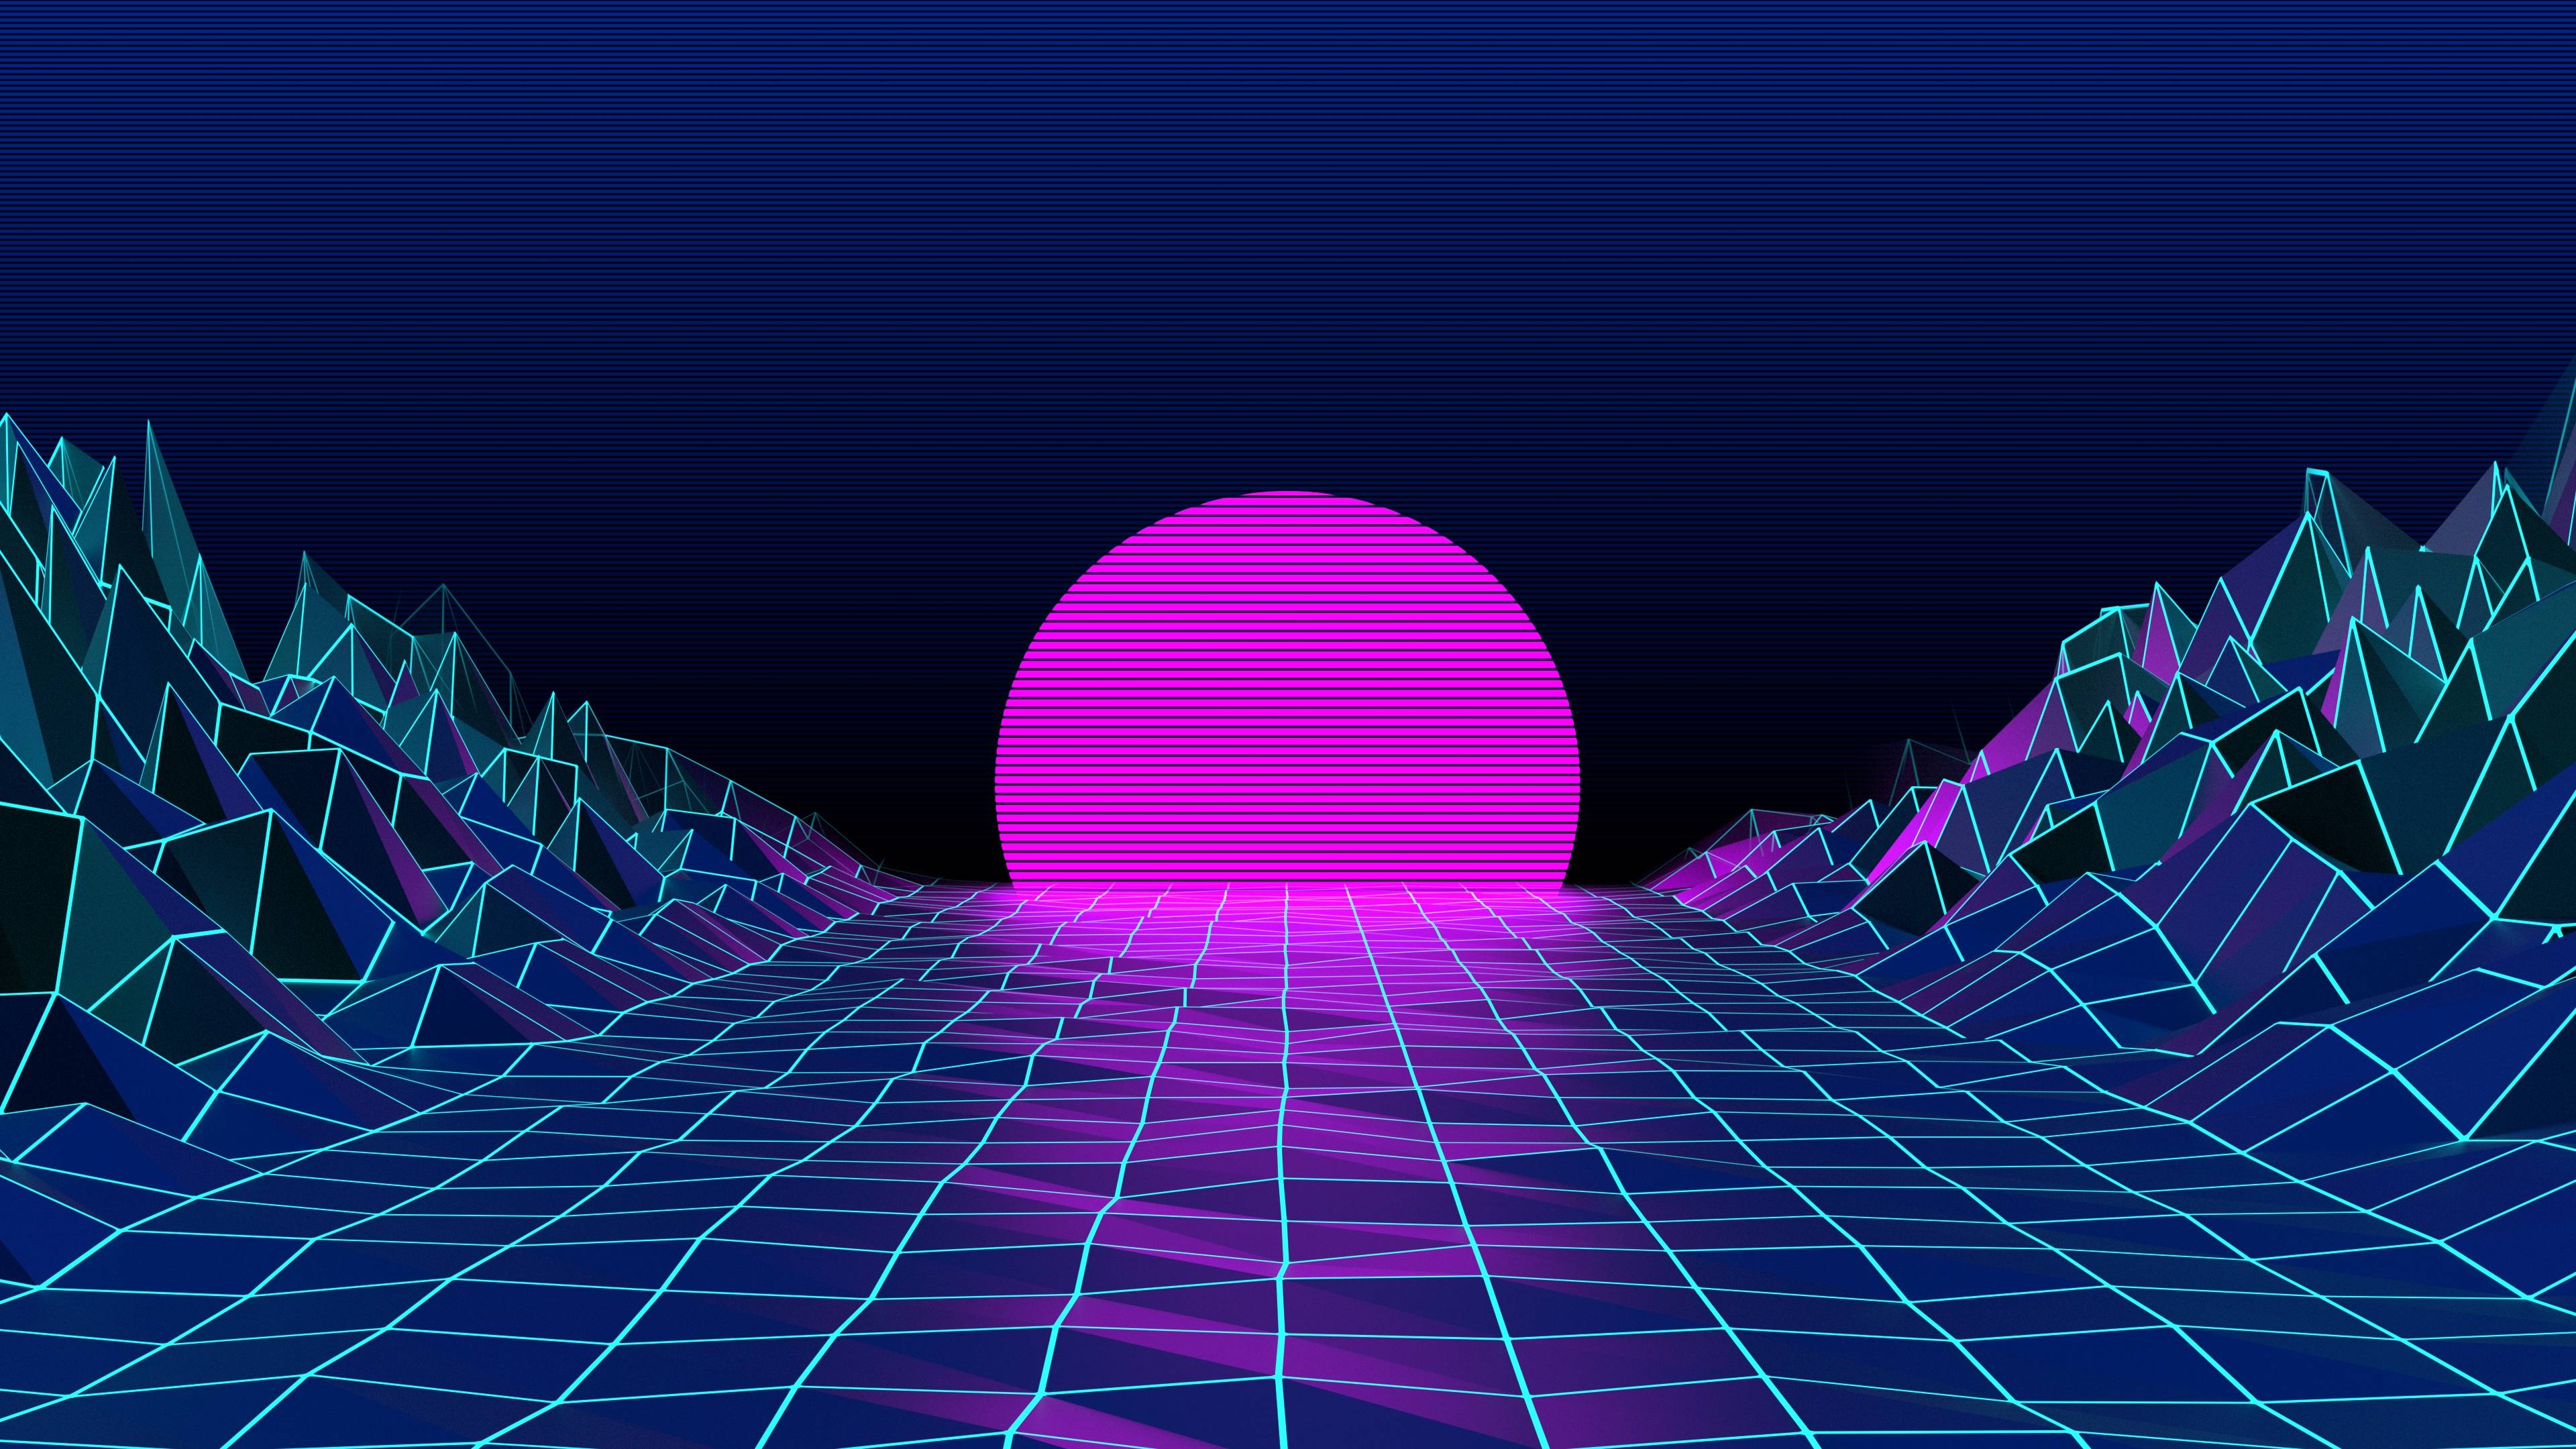 80's Wallpaper Free 80's Background